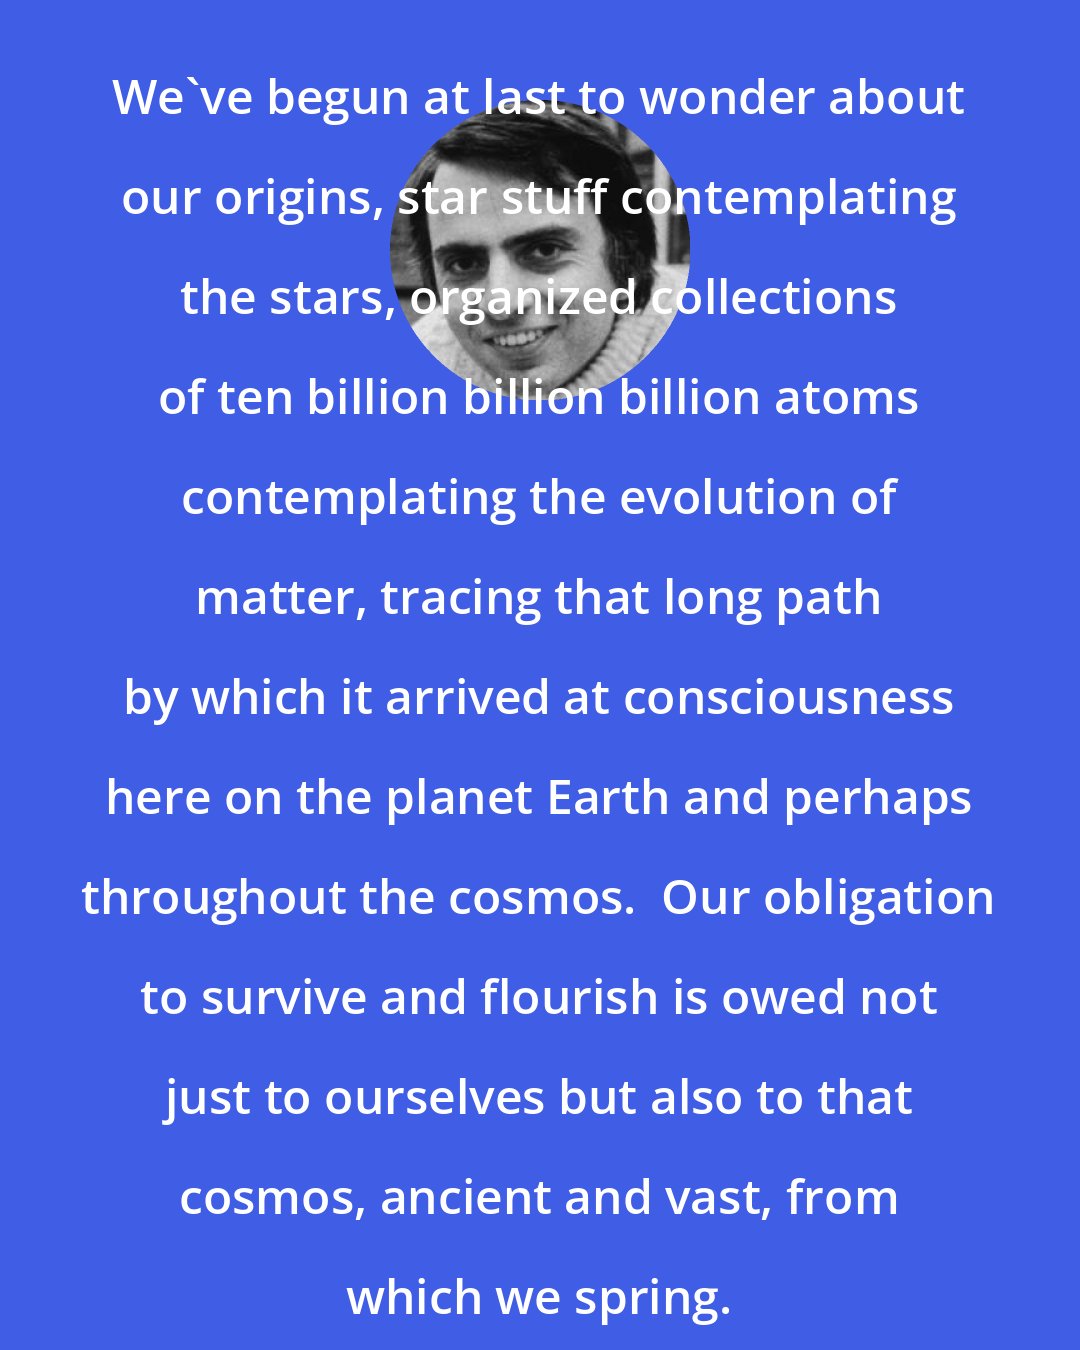 Carl Sagan: We've begun at last to wonder about our origins, star stuff contemplating the stars, organized collections of ten billion billion billion atoms contemplating the evolution of matter, tracing that long path by which it arrived at consciousness here on the planet Earth and perhaps throughout the cosmos.  Our obligation to survive and flourish is owed not just to ourselves but also to that cosmos, ancient and vast, from which we spring.